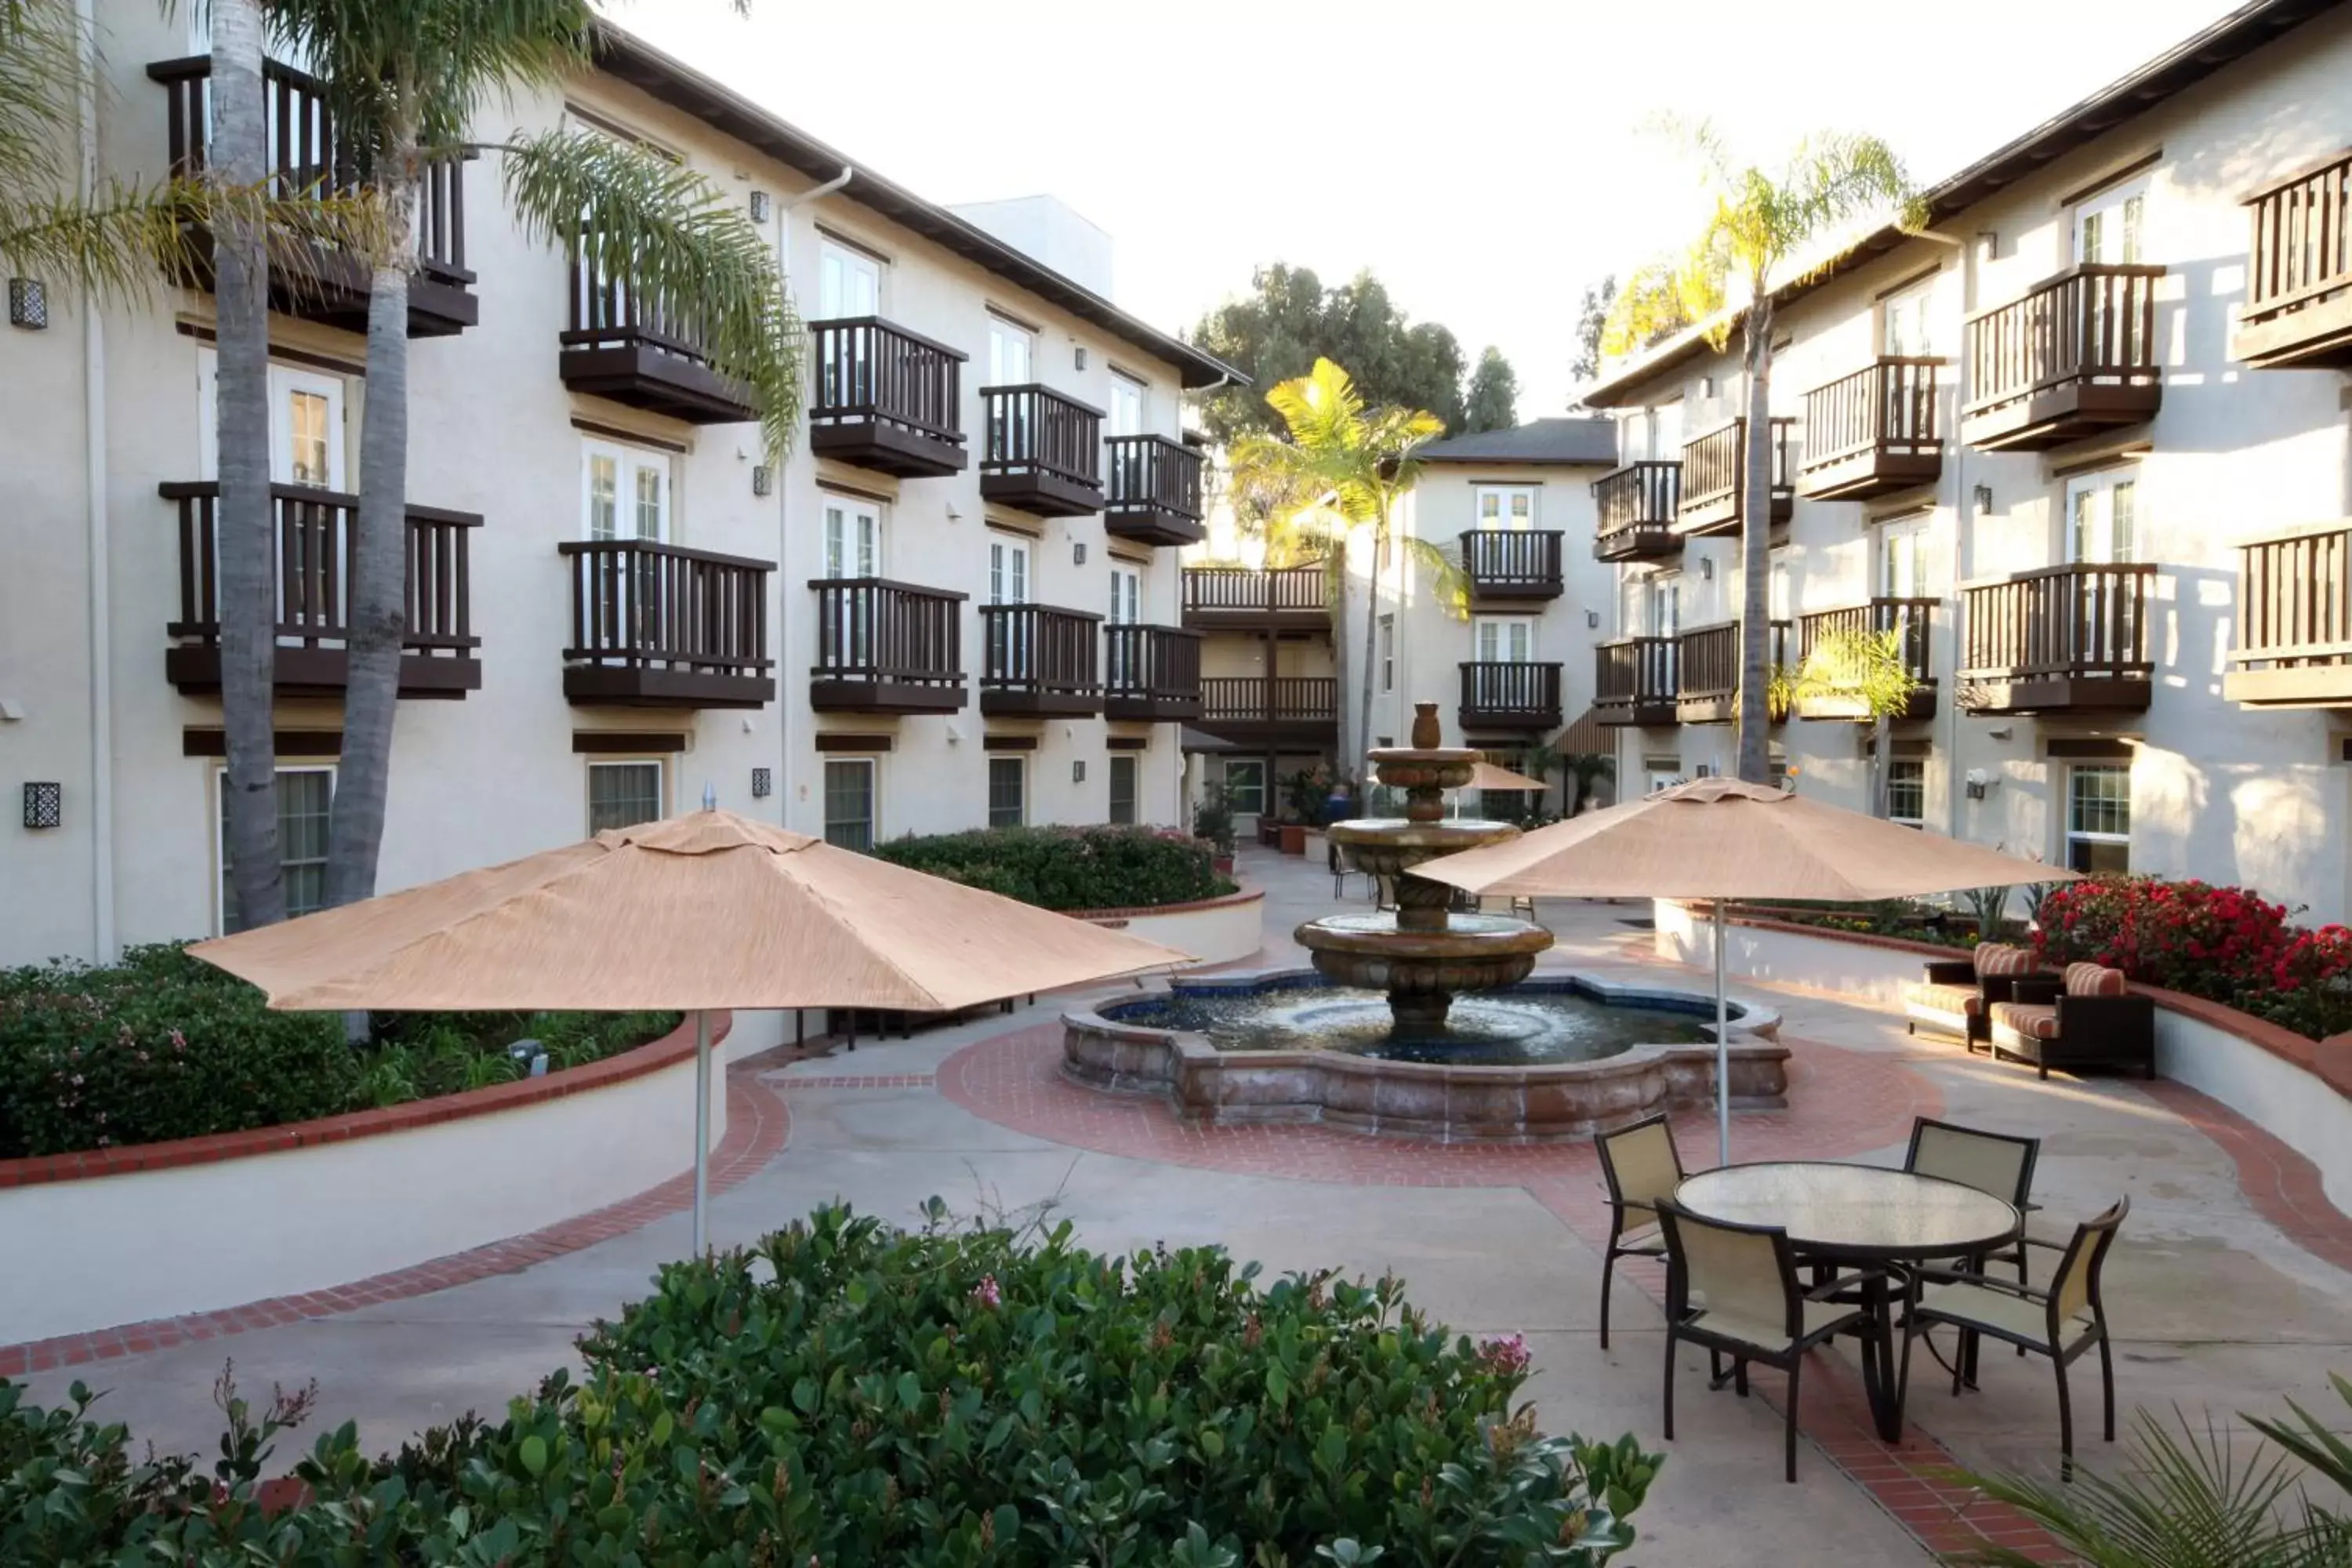 Property building in Fairfield Inn & Suites San Diego Old Town